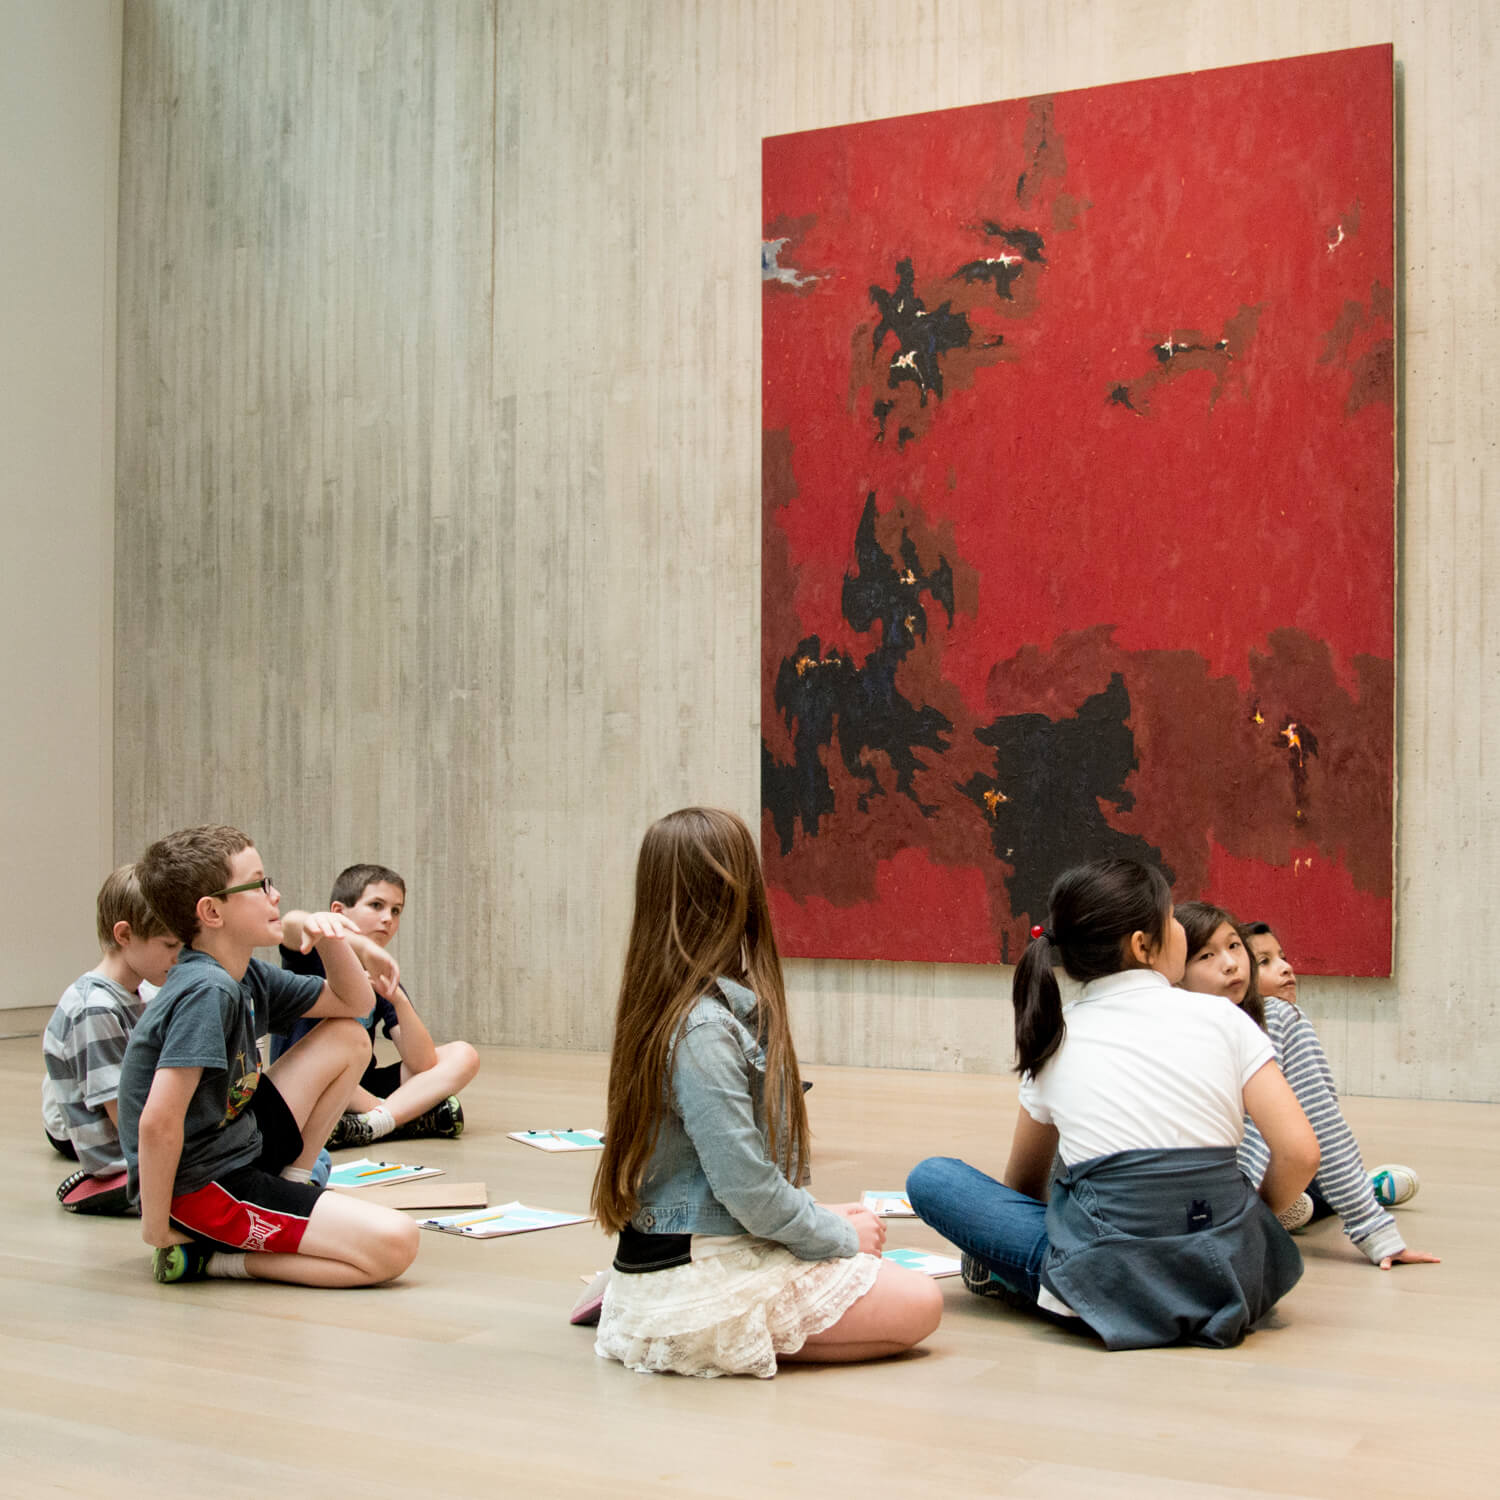 Students sit on the floor of a gallery looking up at the artwork